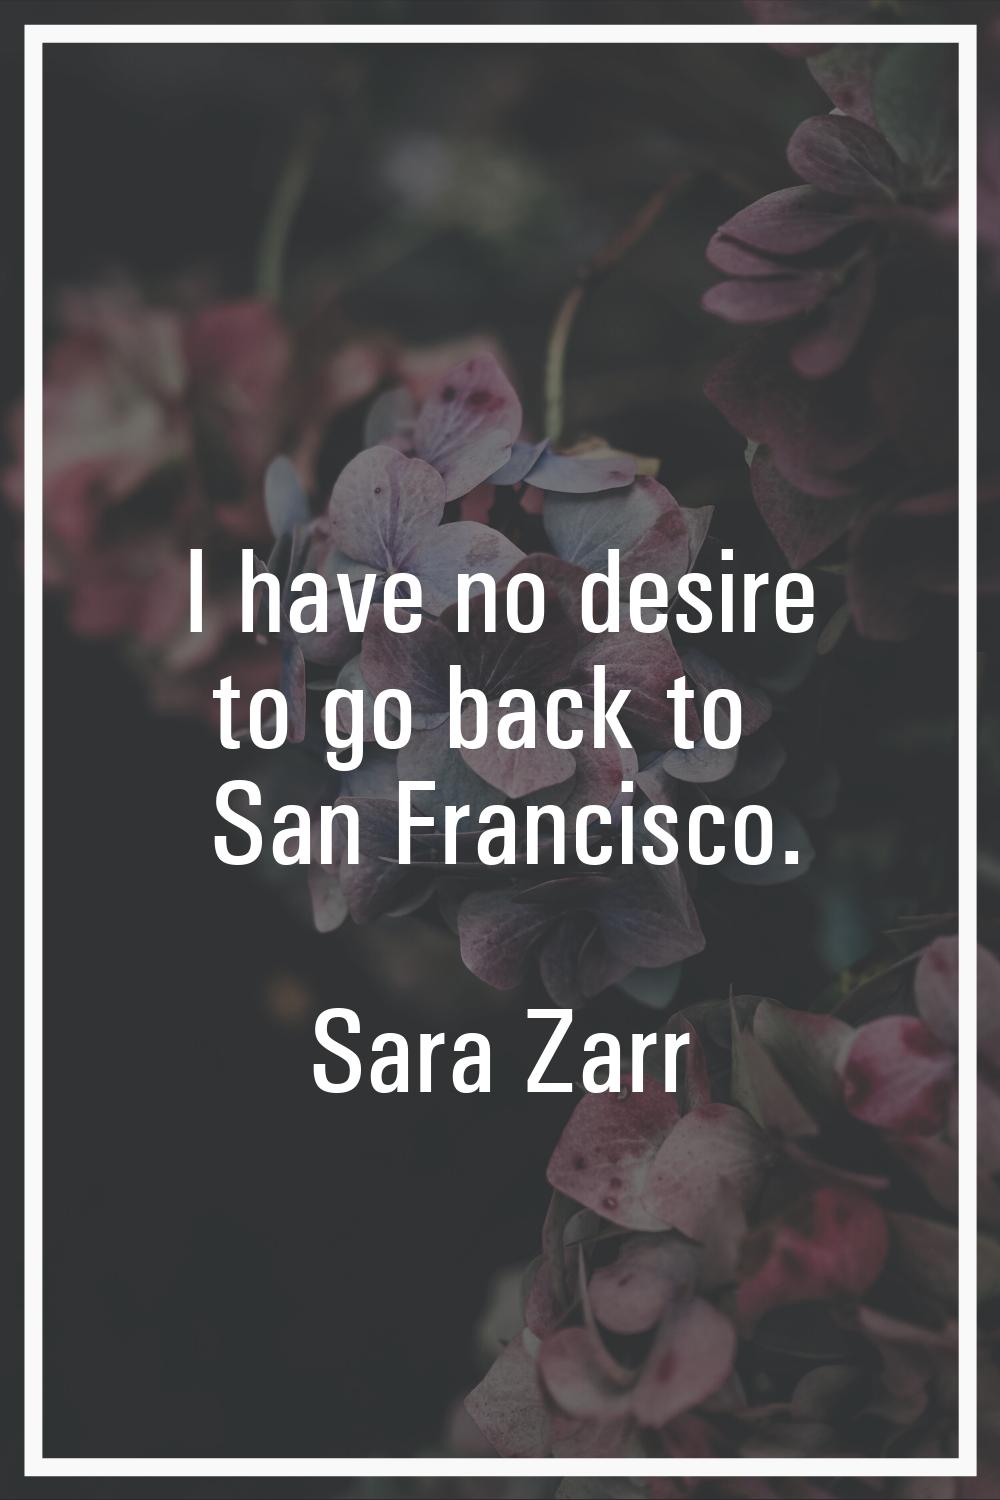 I have no desire to go back to San Francisco.